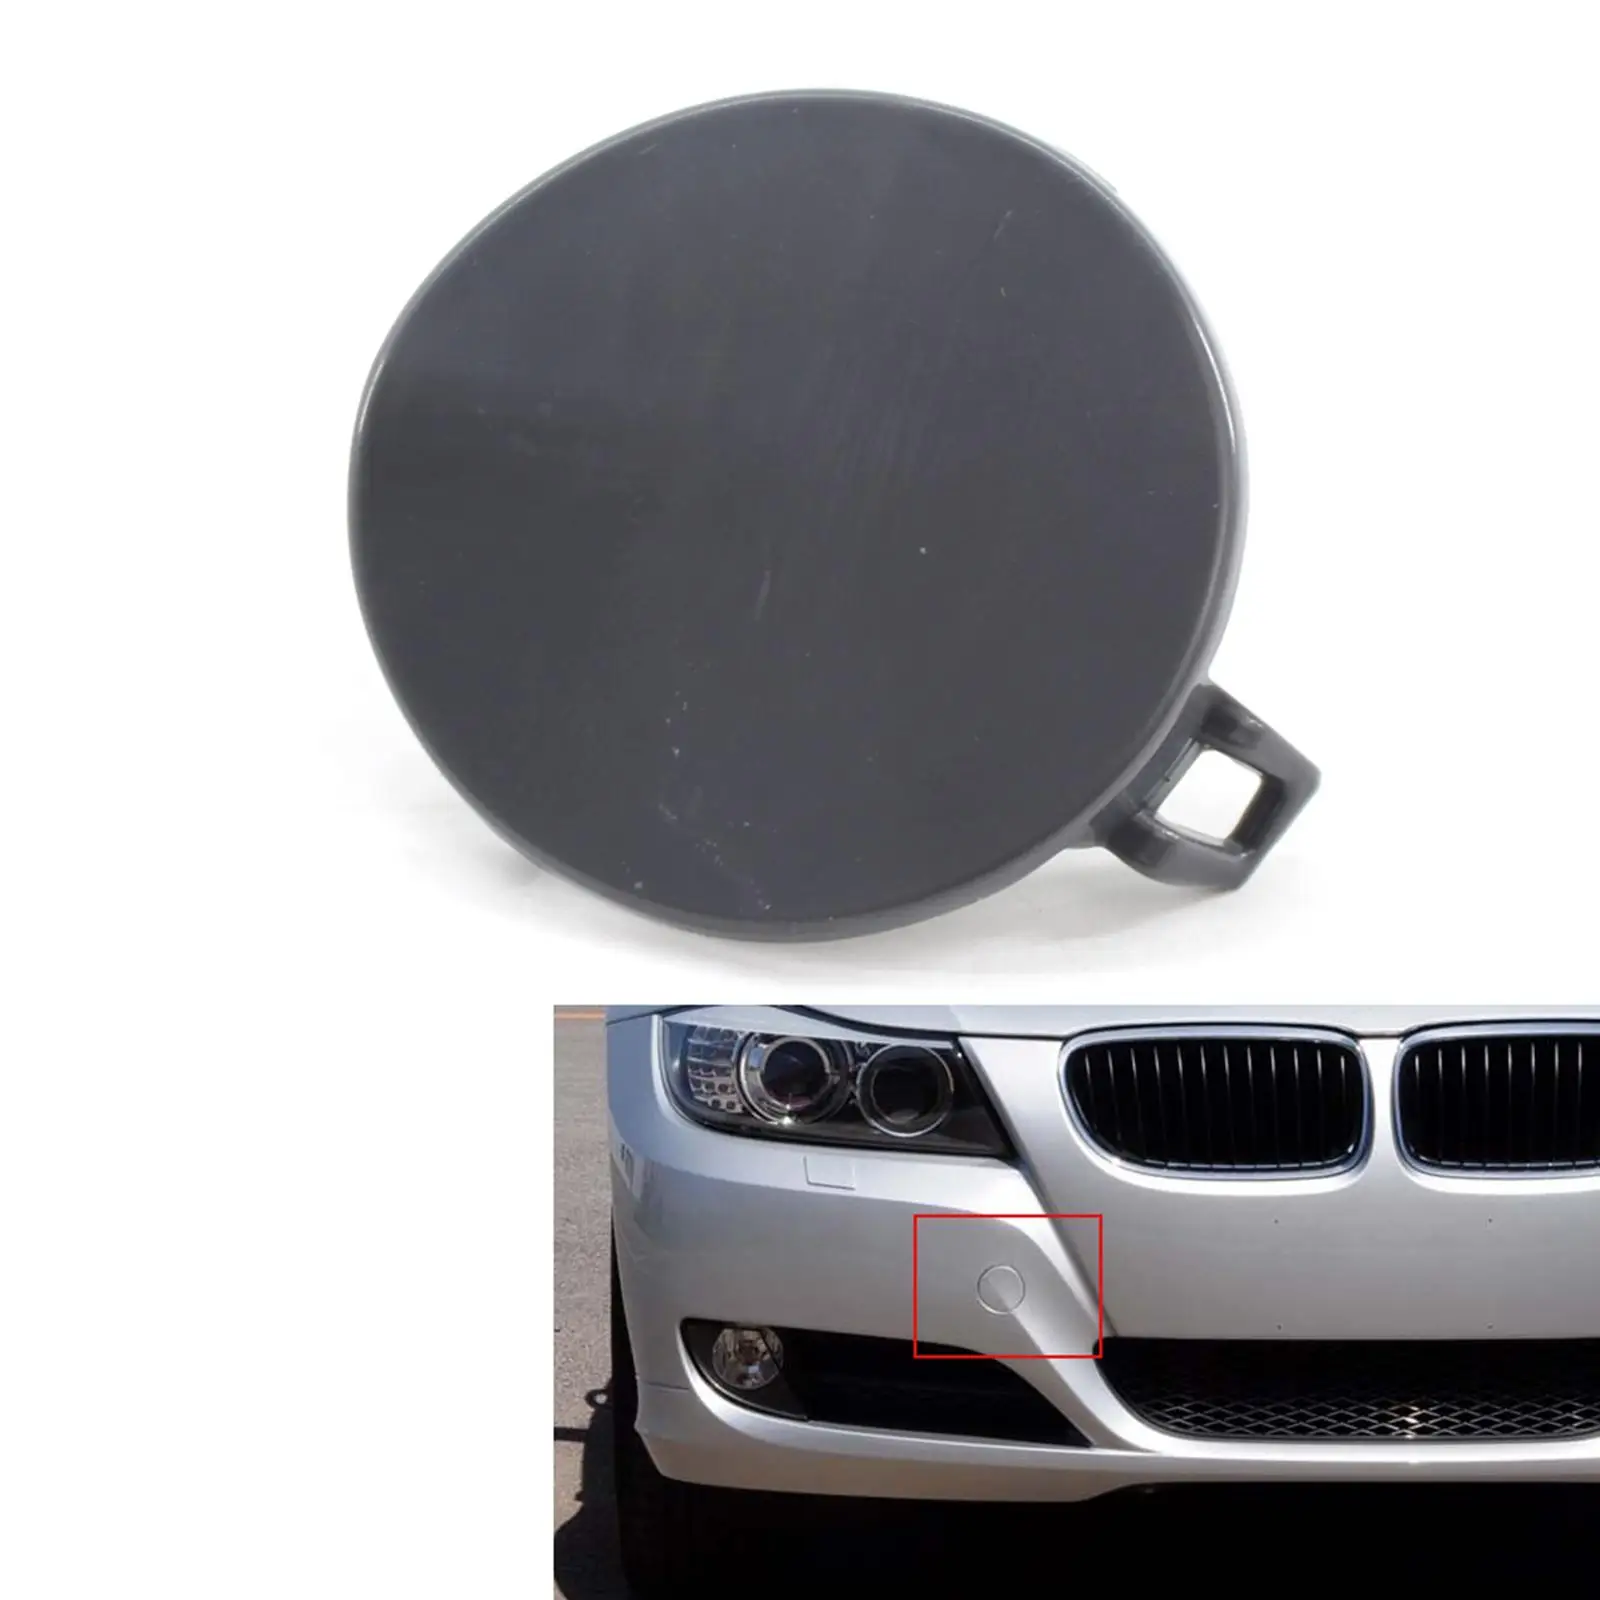 Front Bumper Tow Hook Covers Caps Cover Caps Lid Trim Replacement Towing Hooks Tow Cover for BMW Model E90 51117207299